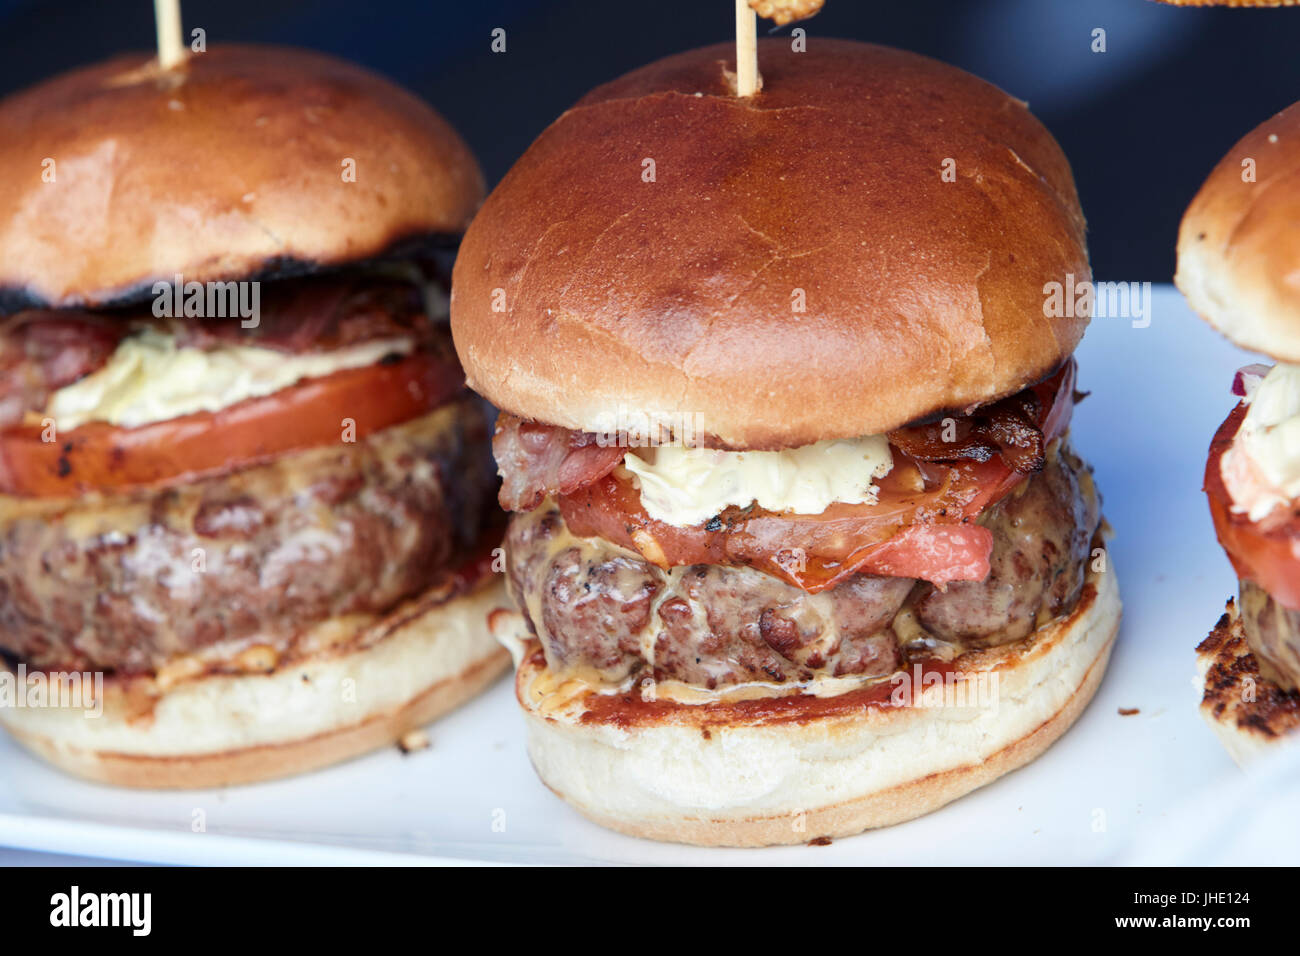 gourmet burgers on display in the uk Stock Photo